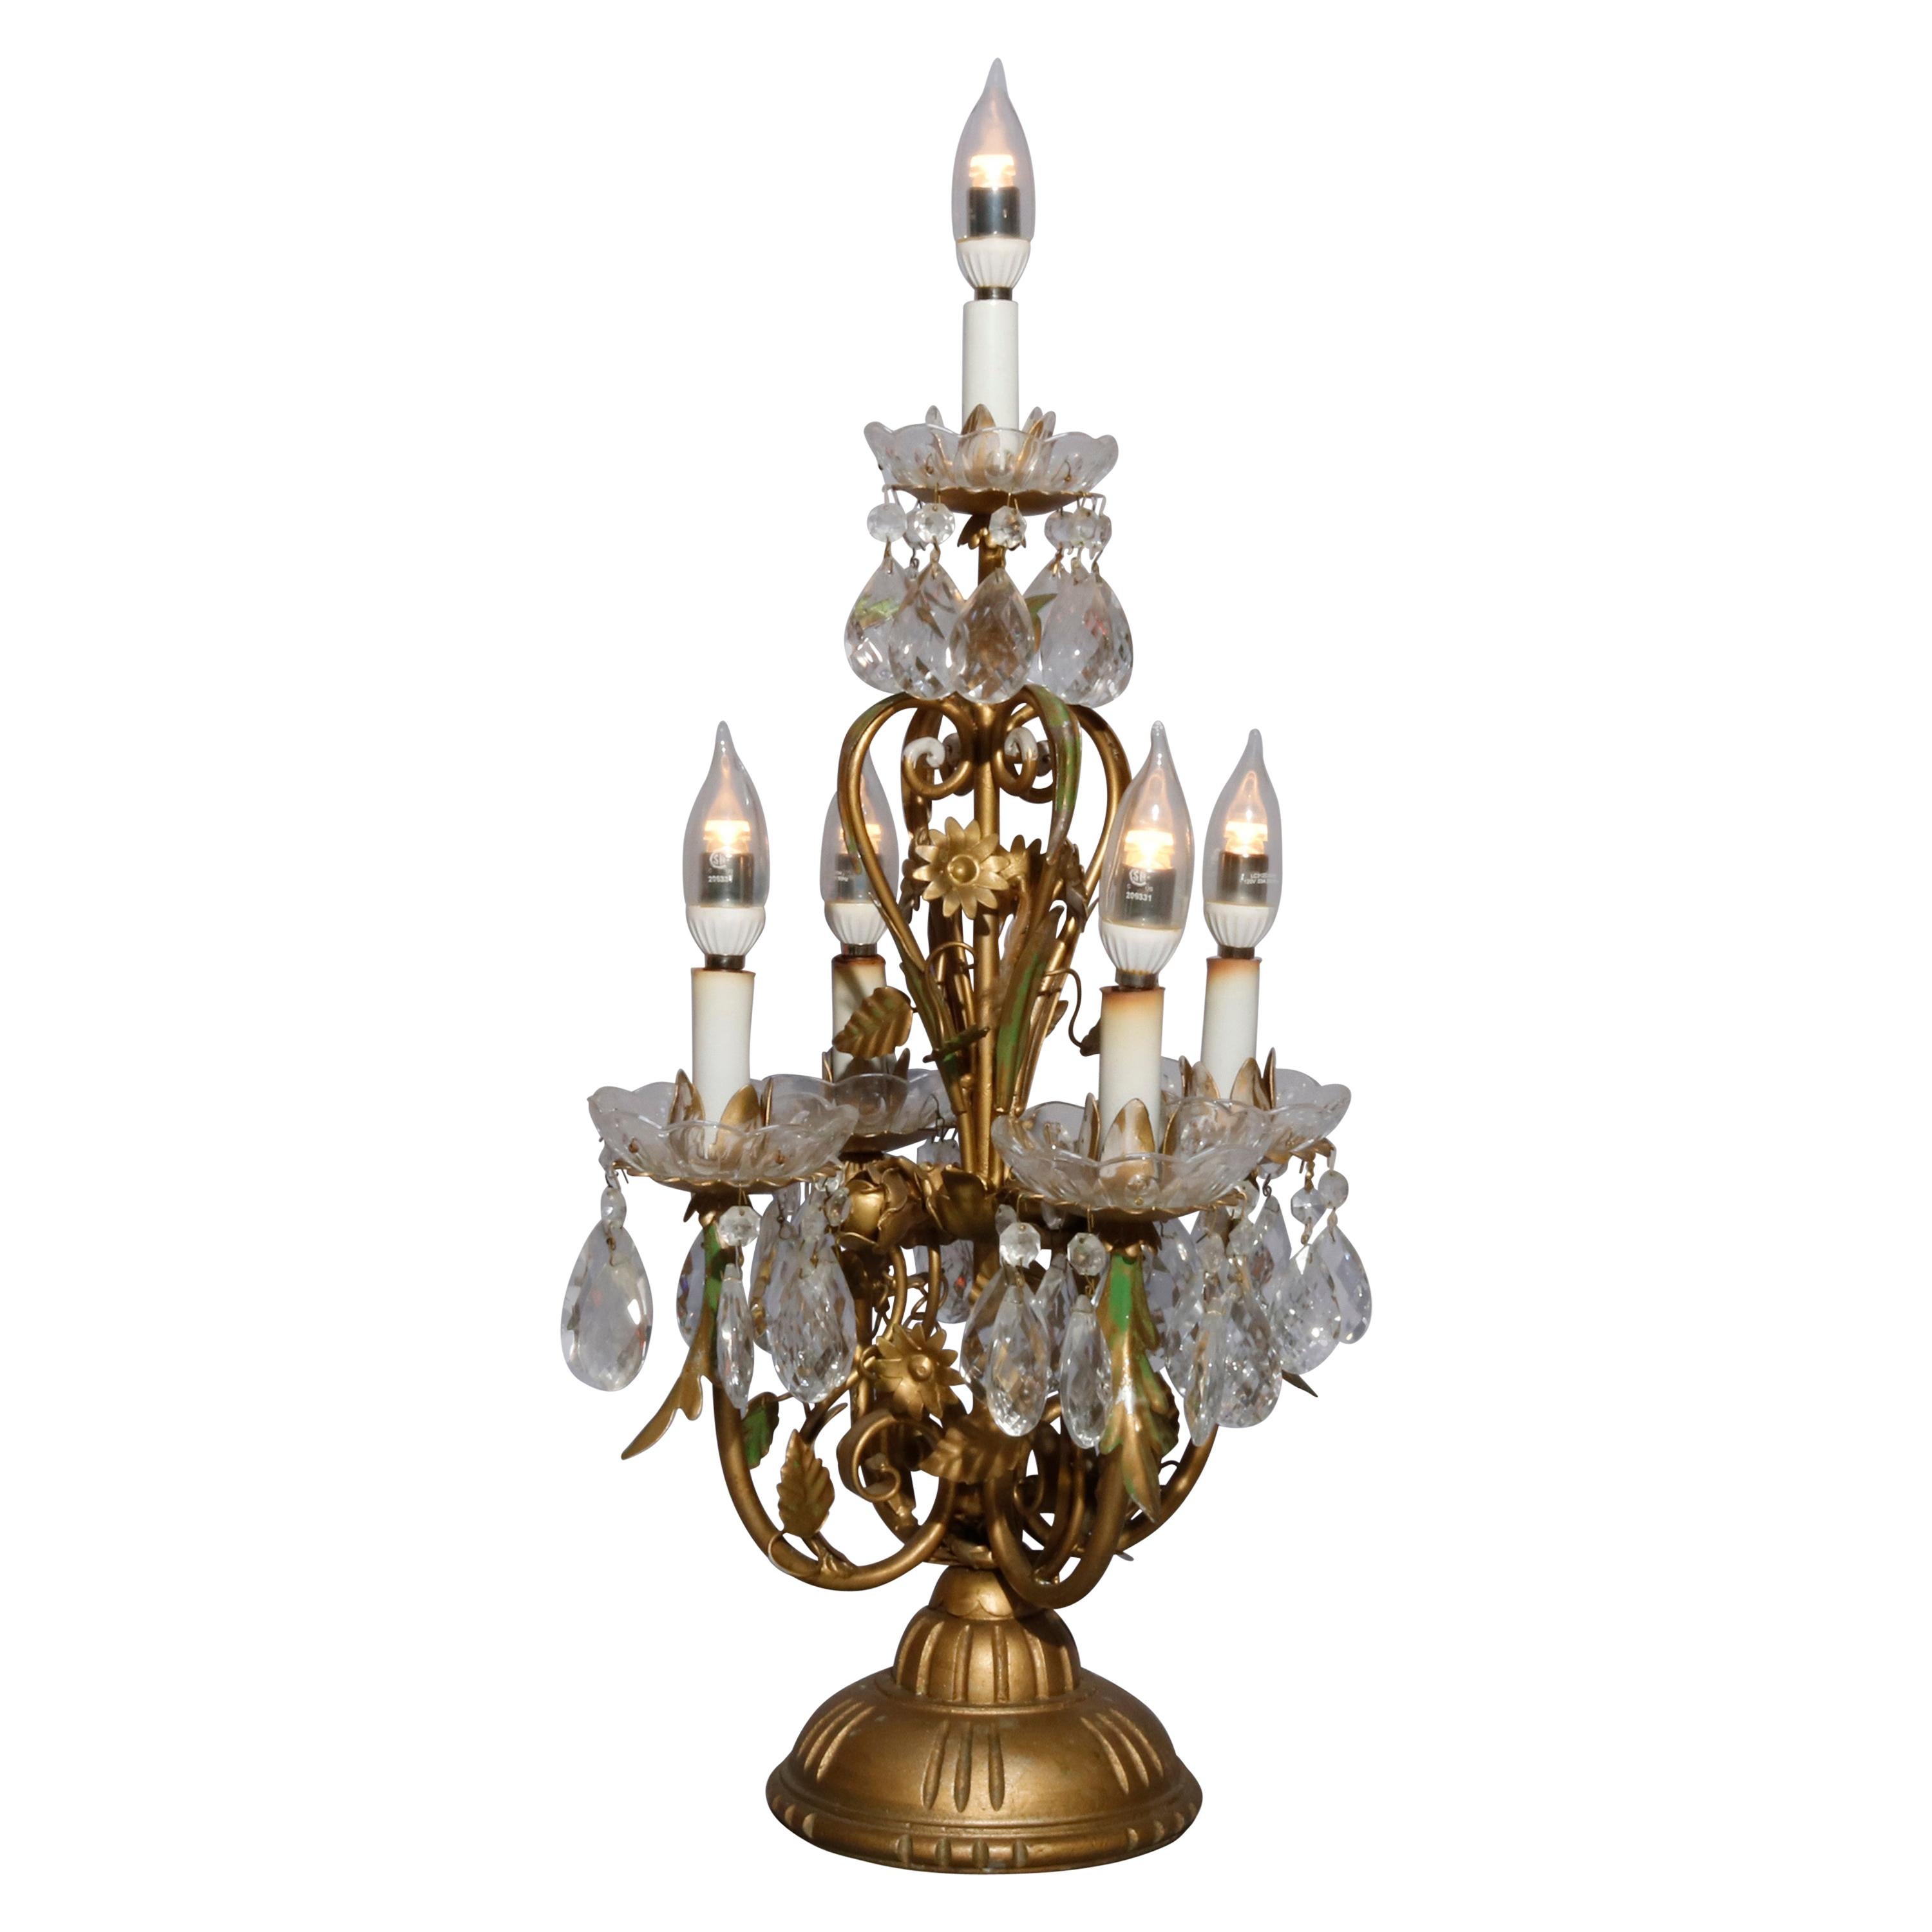 Crystal Prism Candelabra Table Lamp, Vintage French Crystal Table Lamps With Prisms